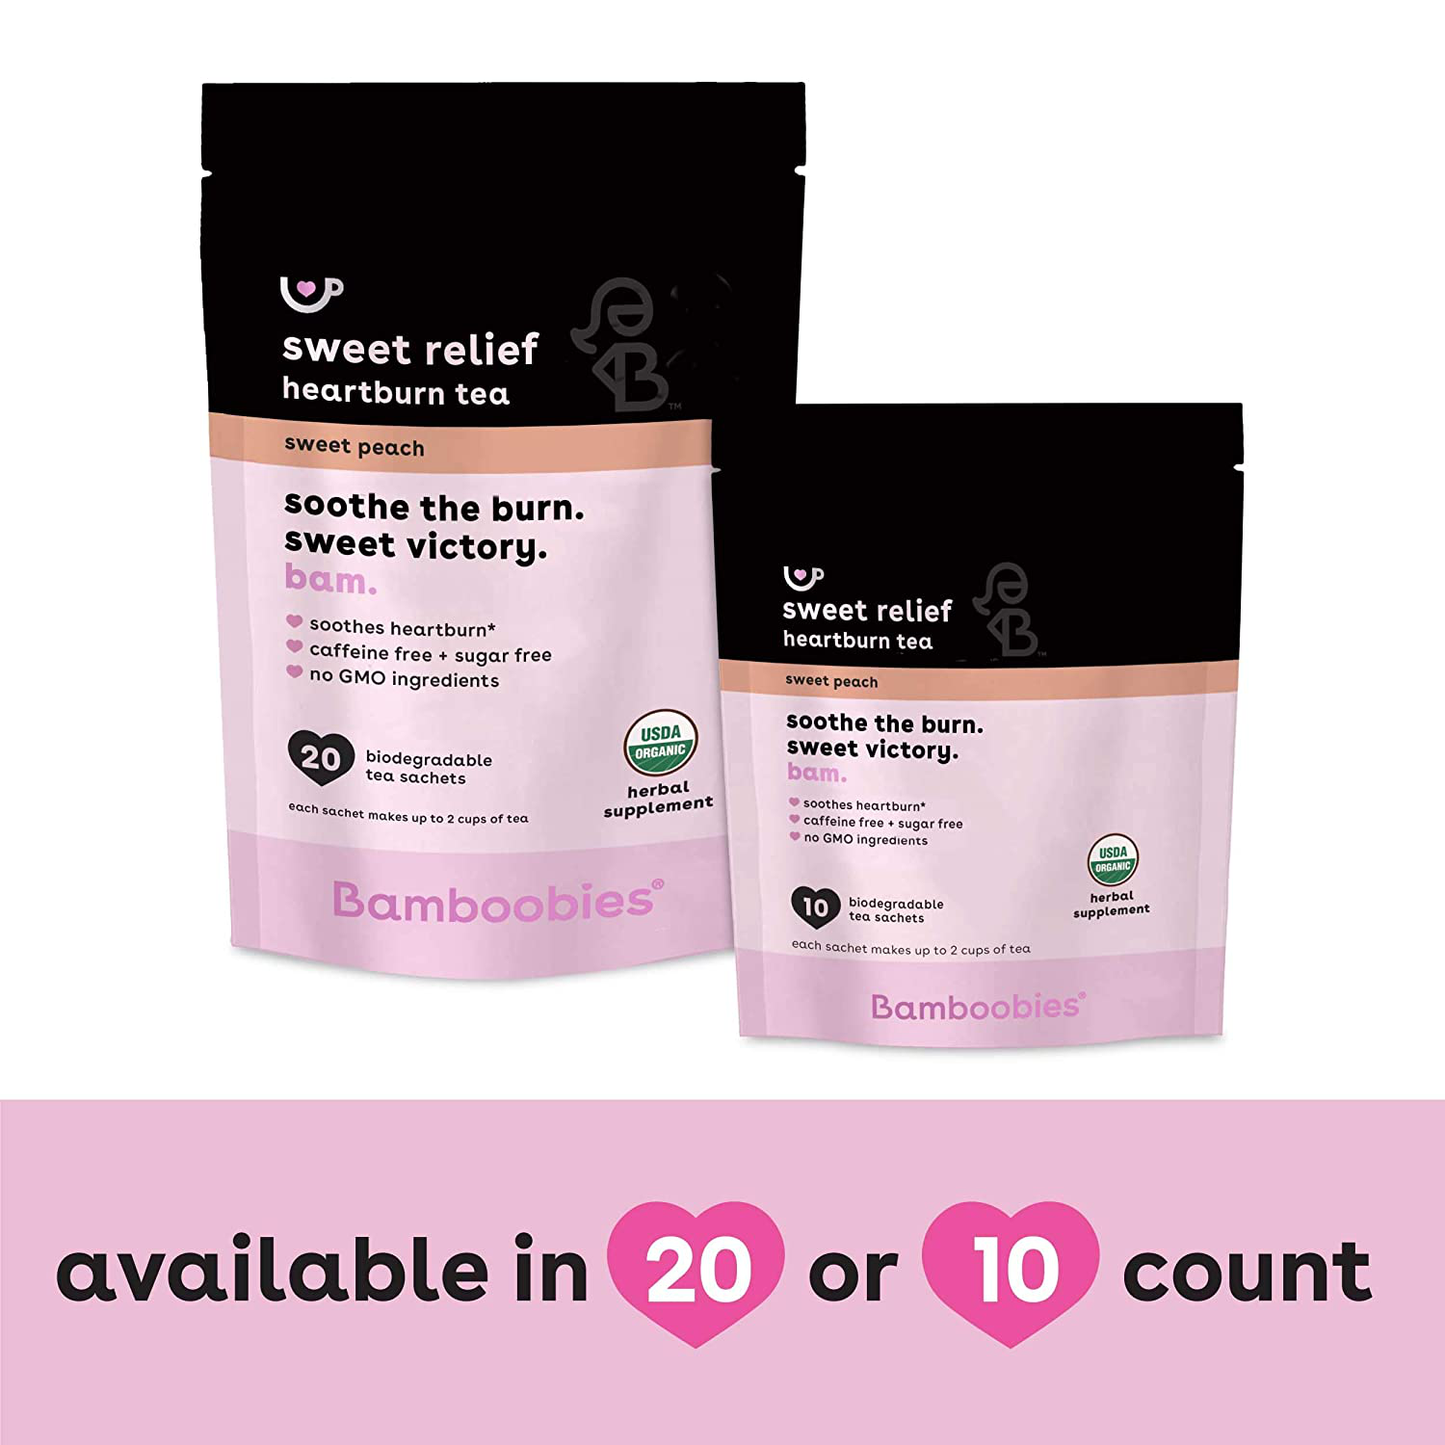 Bamboobies Women’s Lactation Support Drink Mix, Chocolate, Supplement Packets for Breastfeeding, 20 Packets